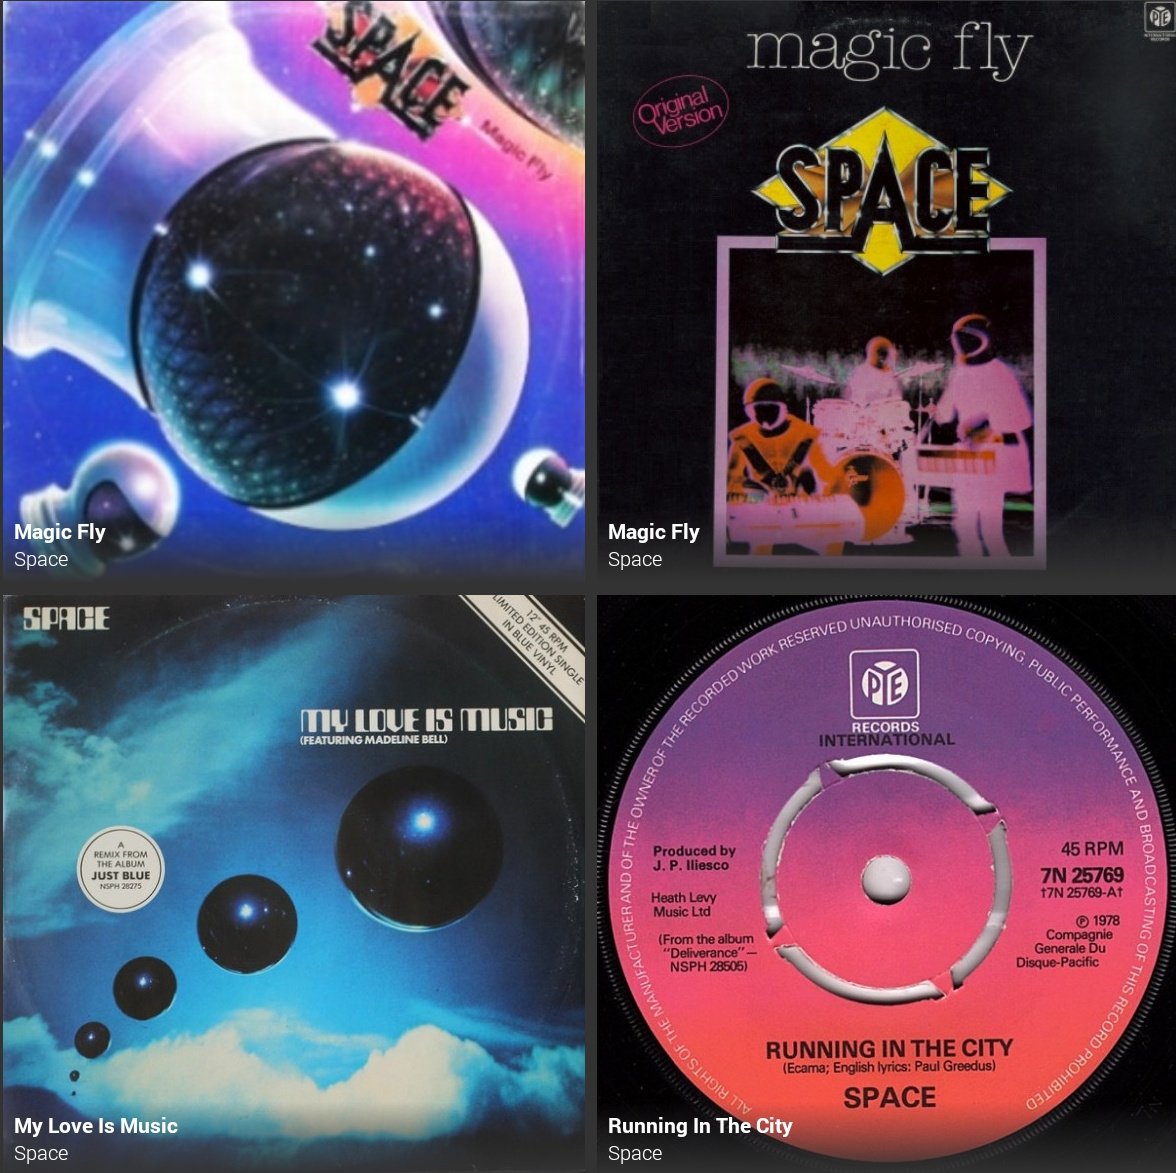 Today - Space Magic Fly (1977, 1977) My Love Is Music (1978) Running In The City (1978) Ambient, Synthpop, Disco, Electro #vinyl #vinylrecords #records #synthpop #disco #ambient #electro #70s #DaftPunk #spacedisco #MagicFly #StarWars #1970s #Space